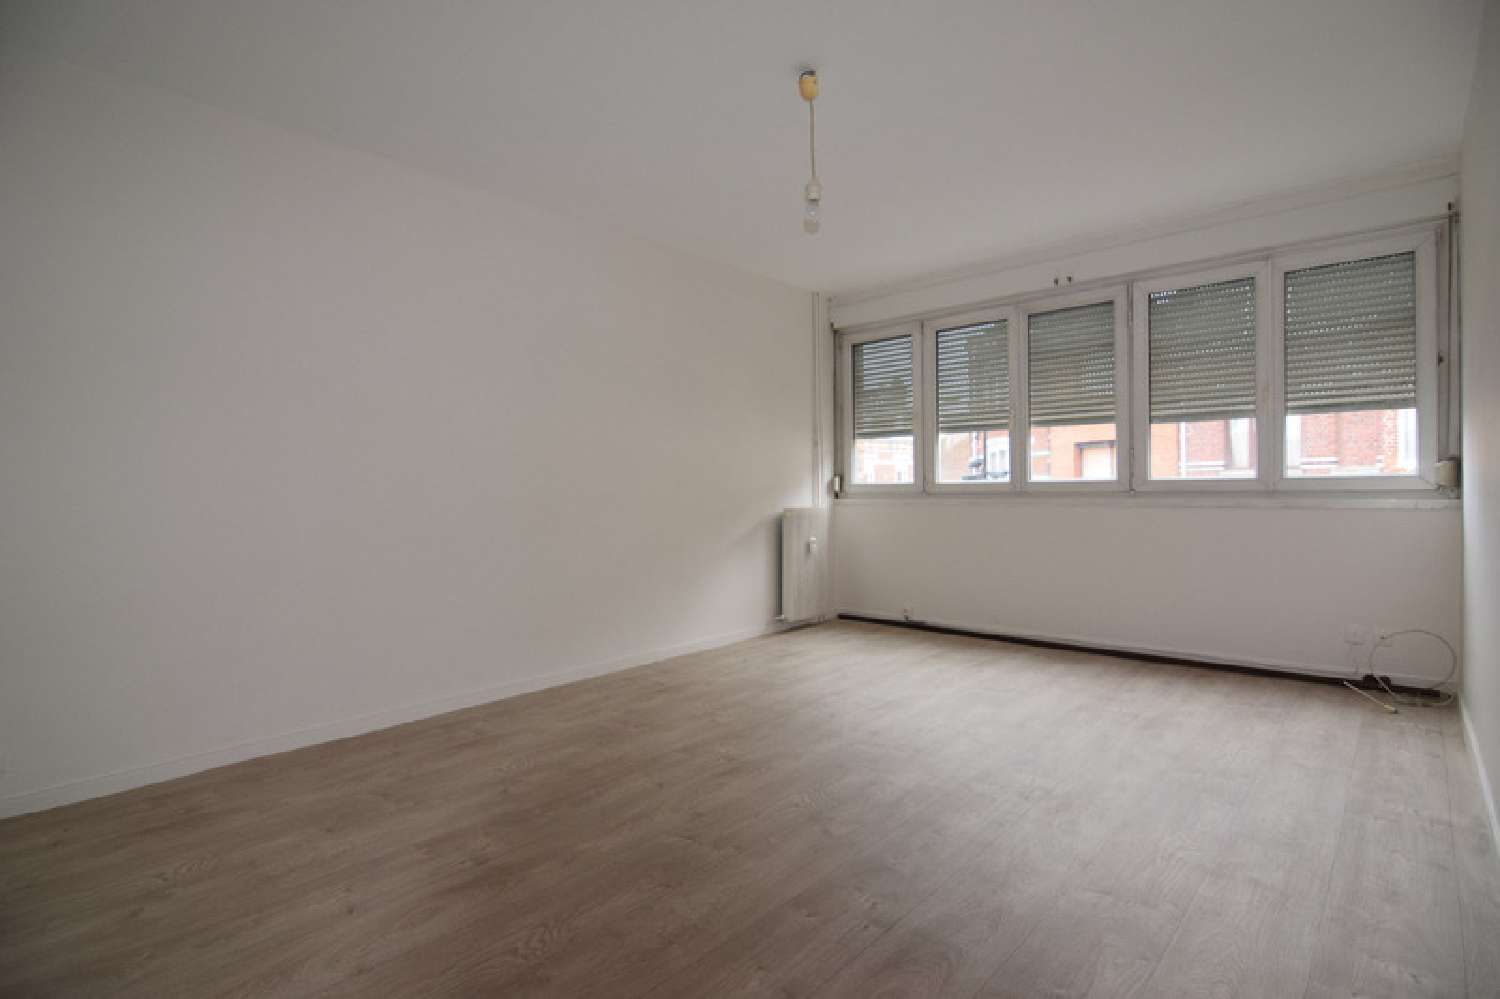  à vendre appartement Fâches-Thumesnil Nord 1